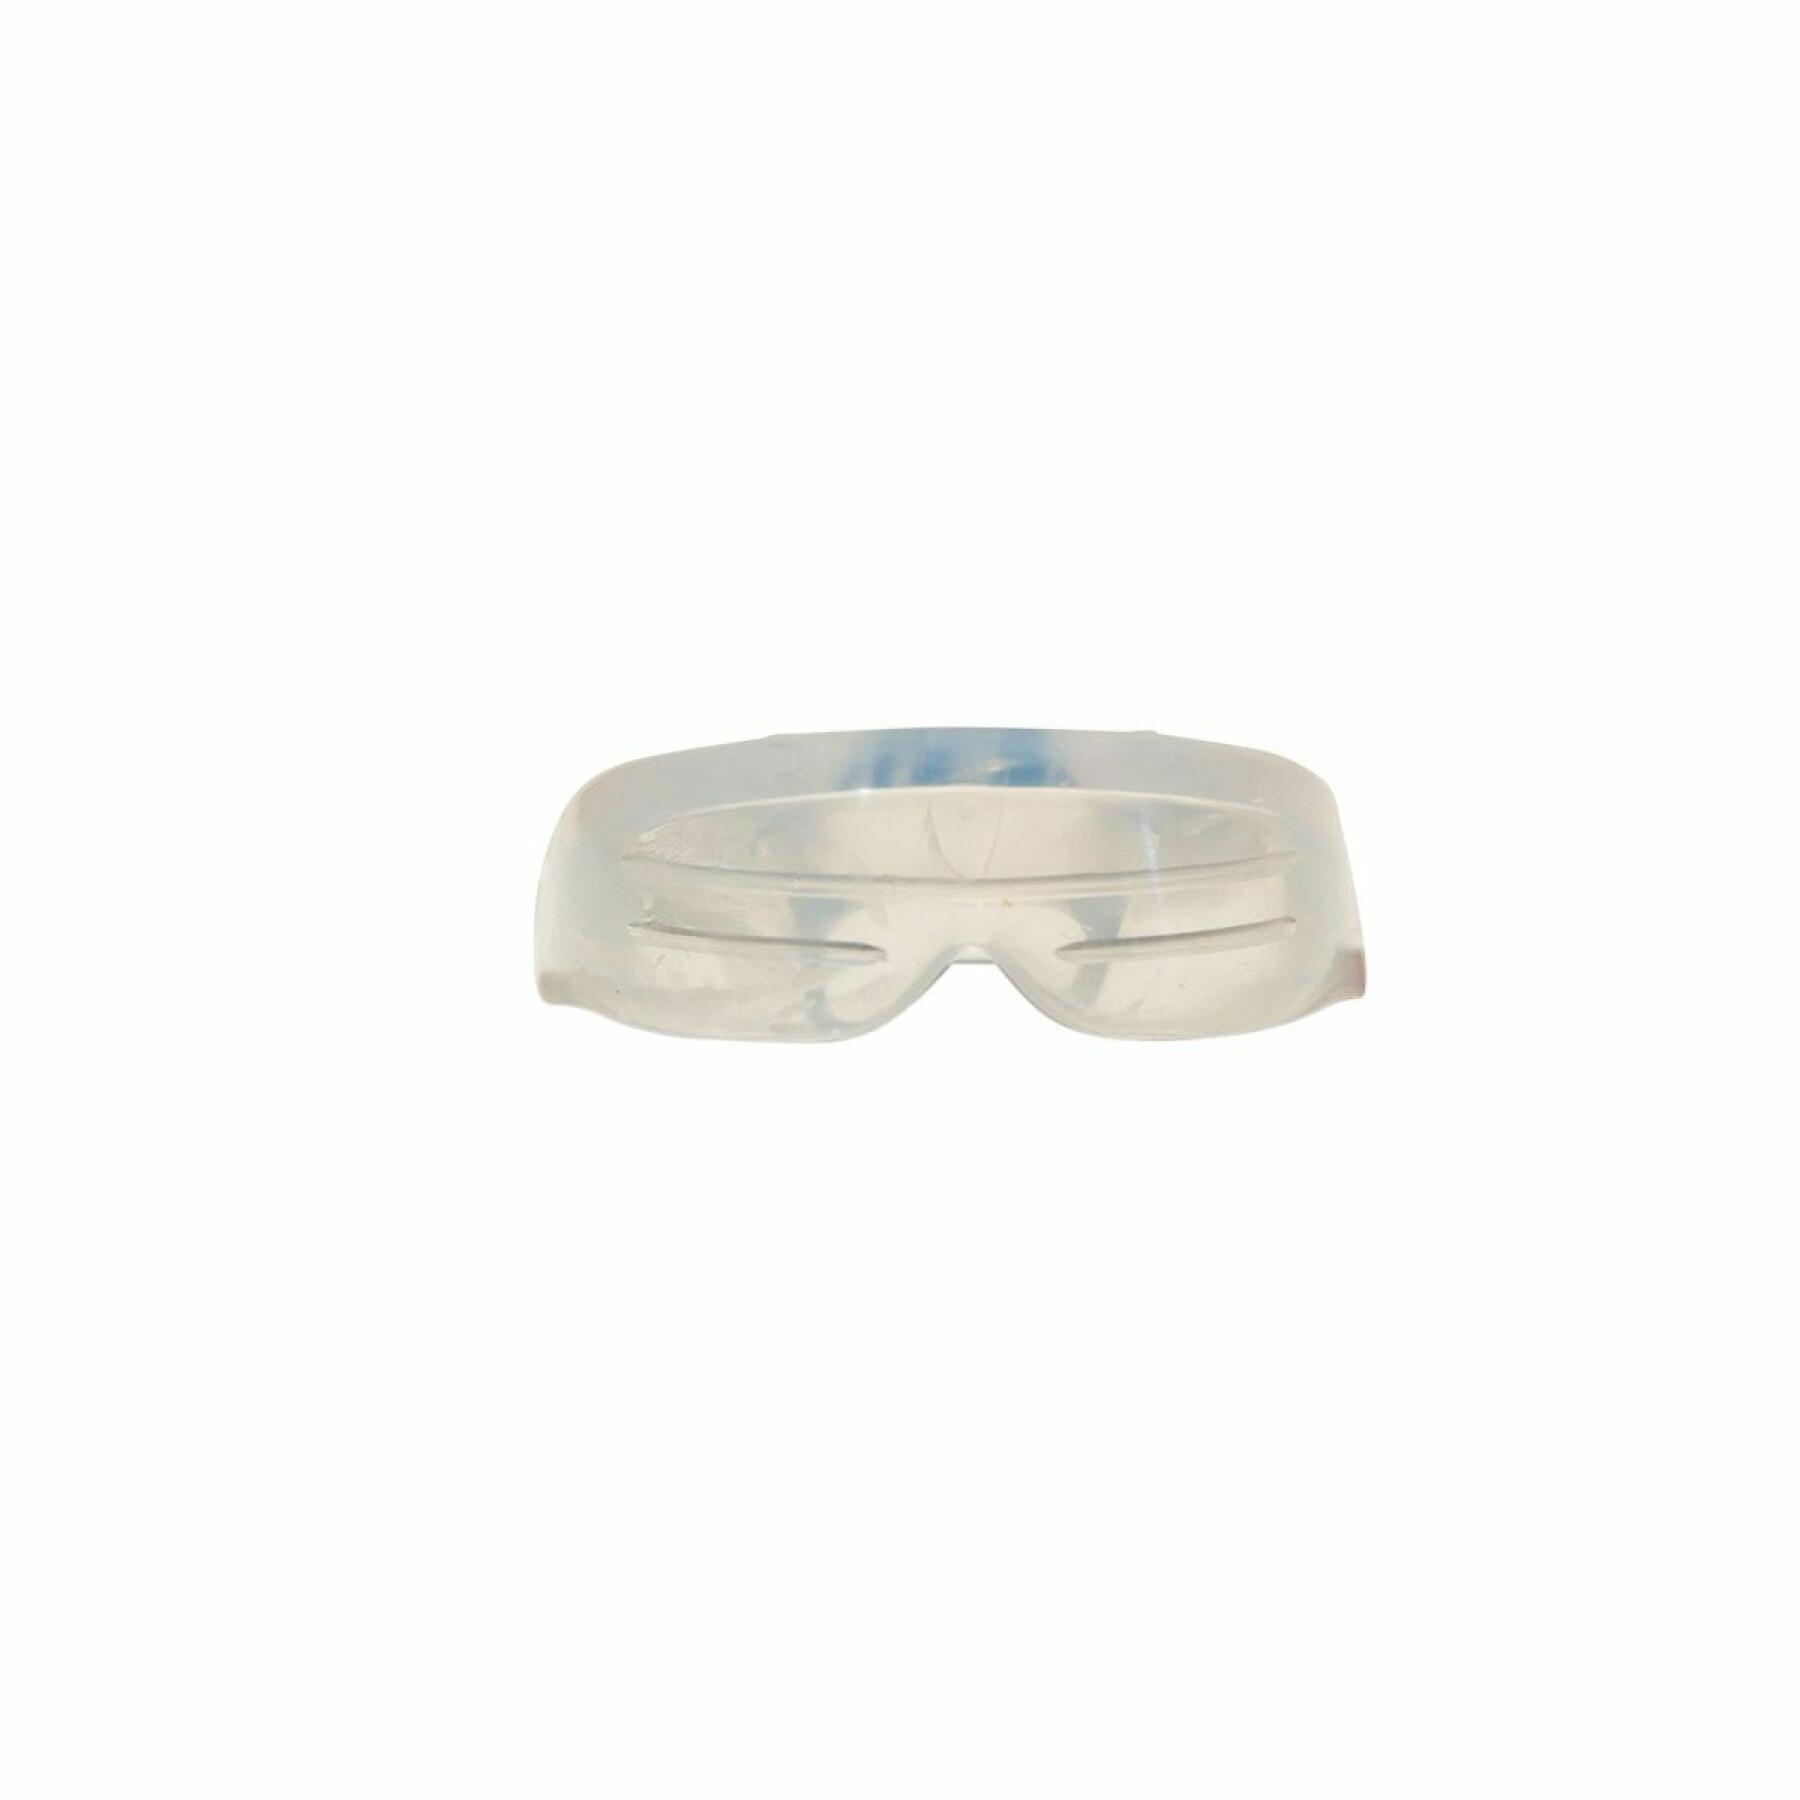 Children's mouth guard Booster Fight Gear Mg 2